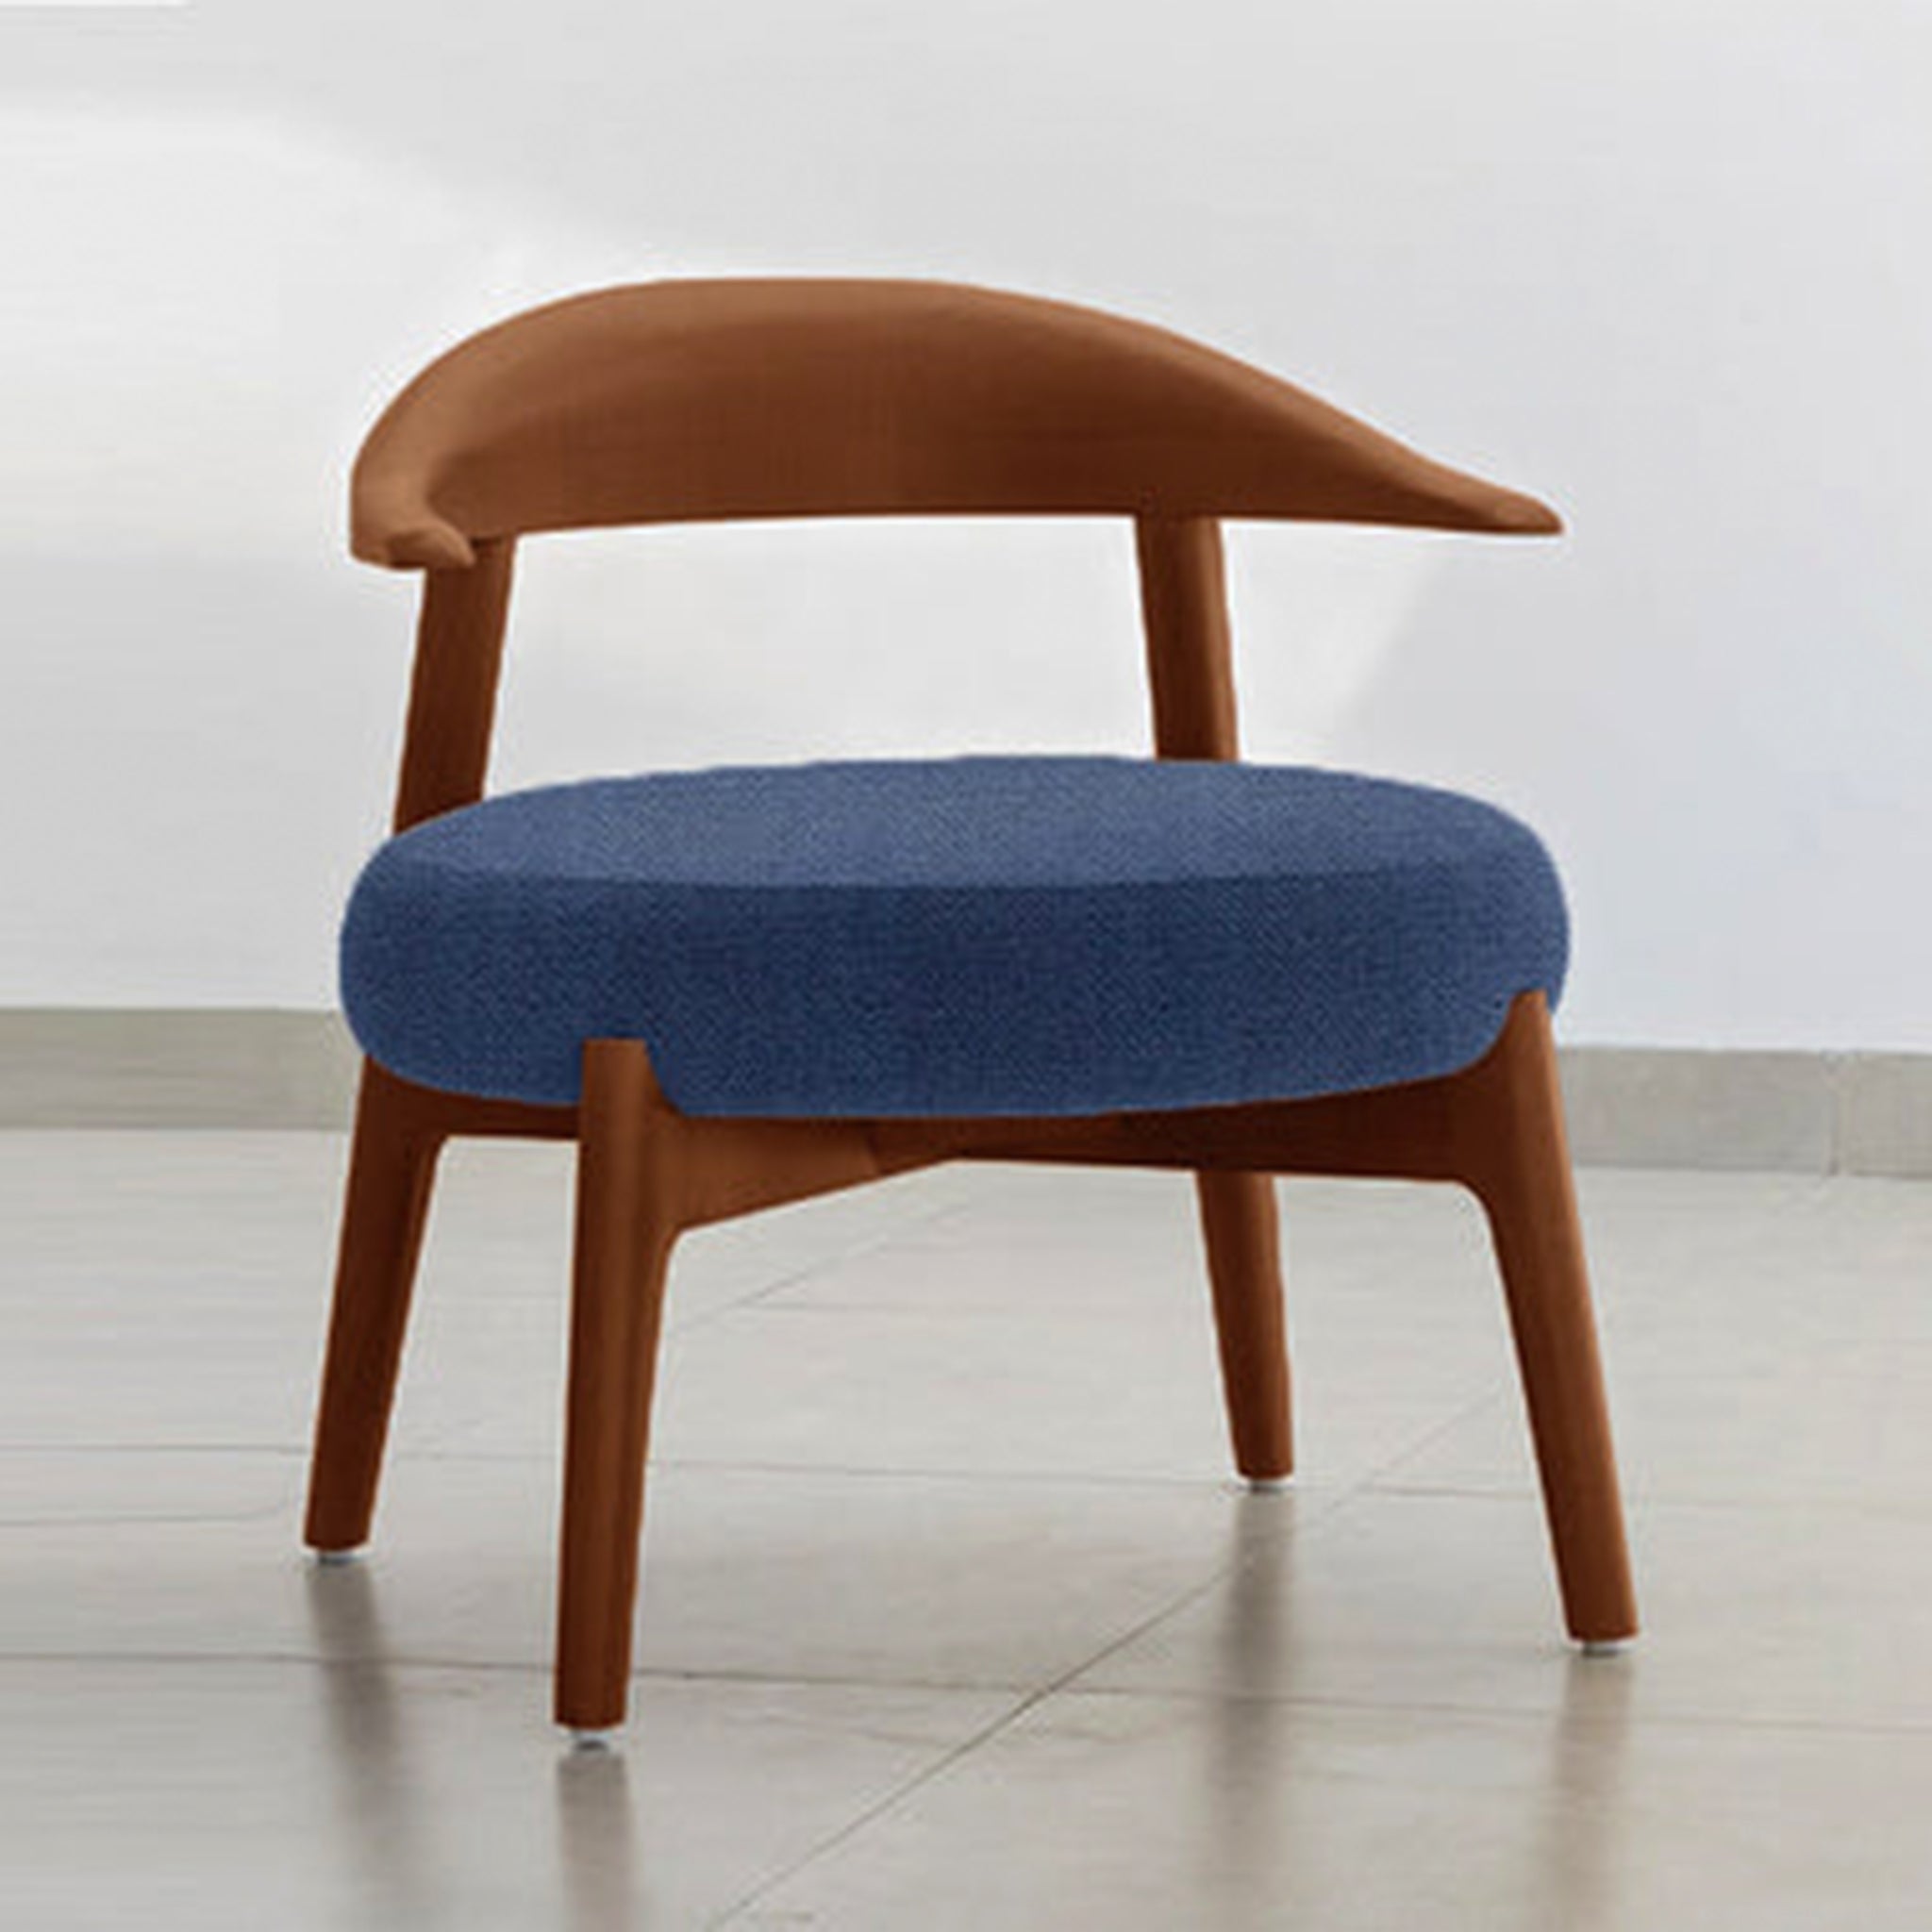 "The Hyde Accent Chair with unique wooden curves and comfortable seating"